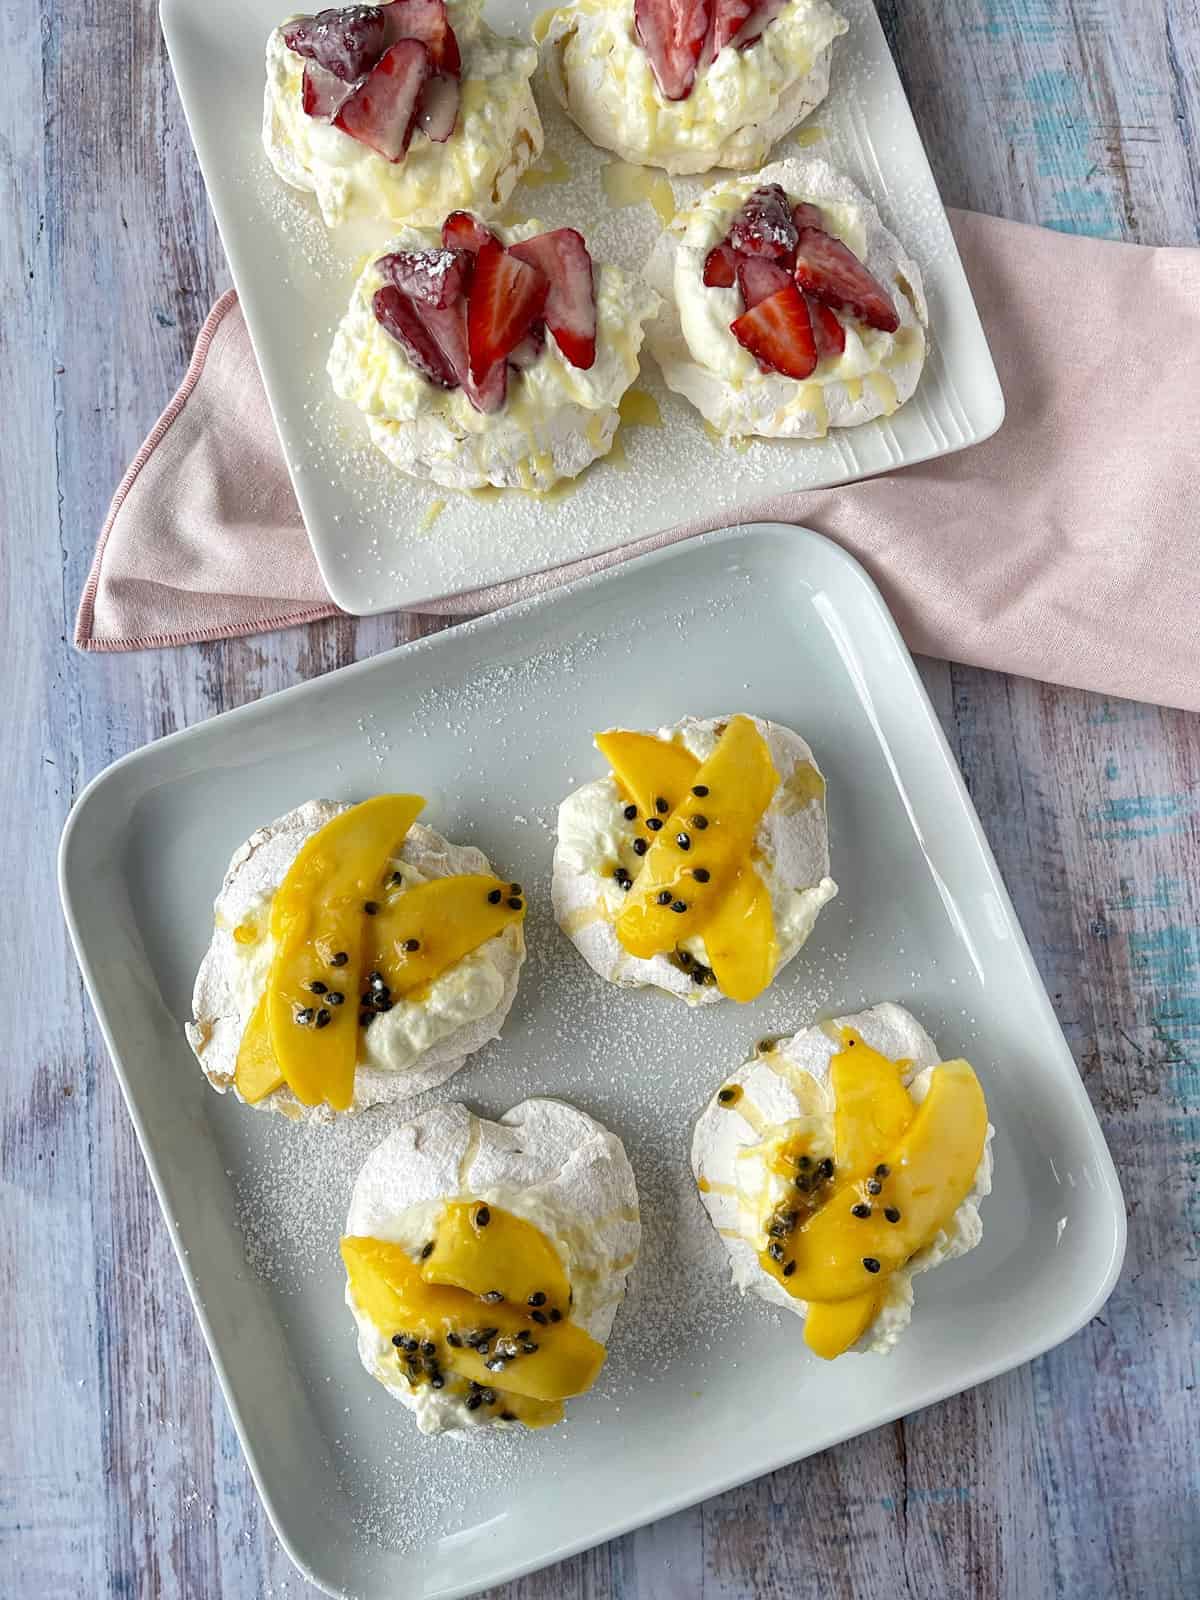 Birds eye view of mango and and strawberry pavlovas sitting on white platters